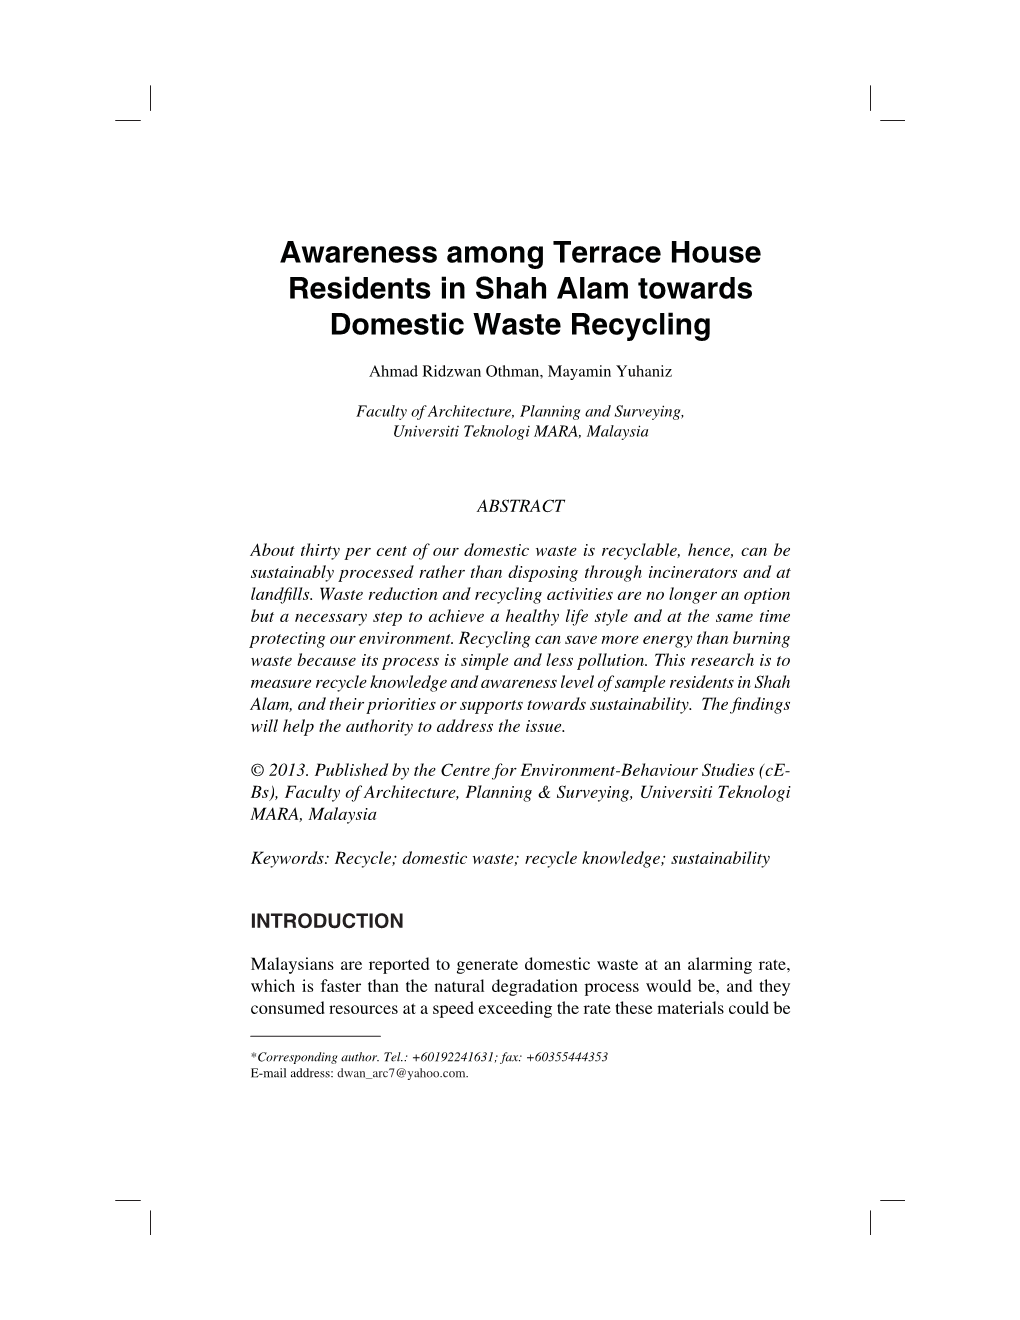 Awareness Among Terrace House Residents in Shah Alam Towards Domestic Waste Recycling